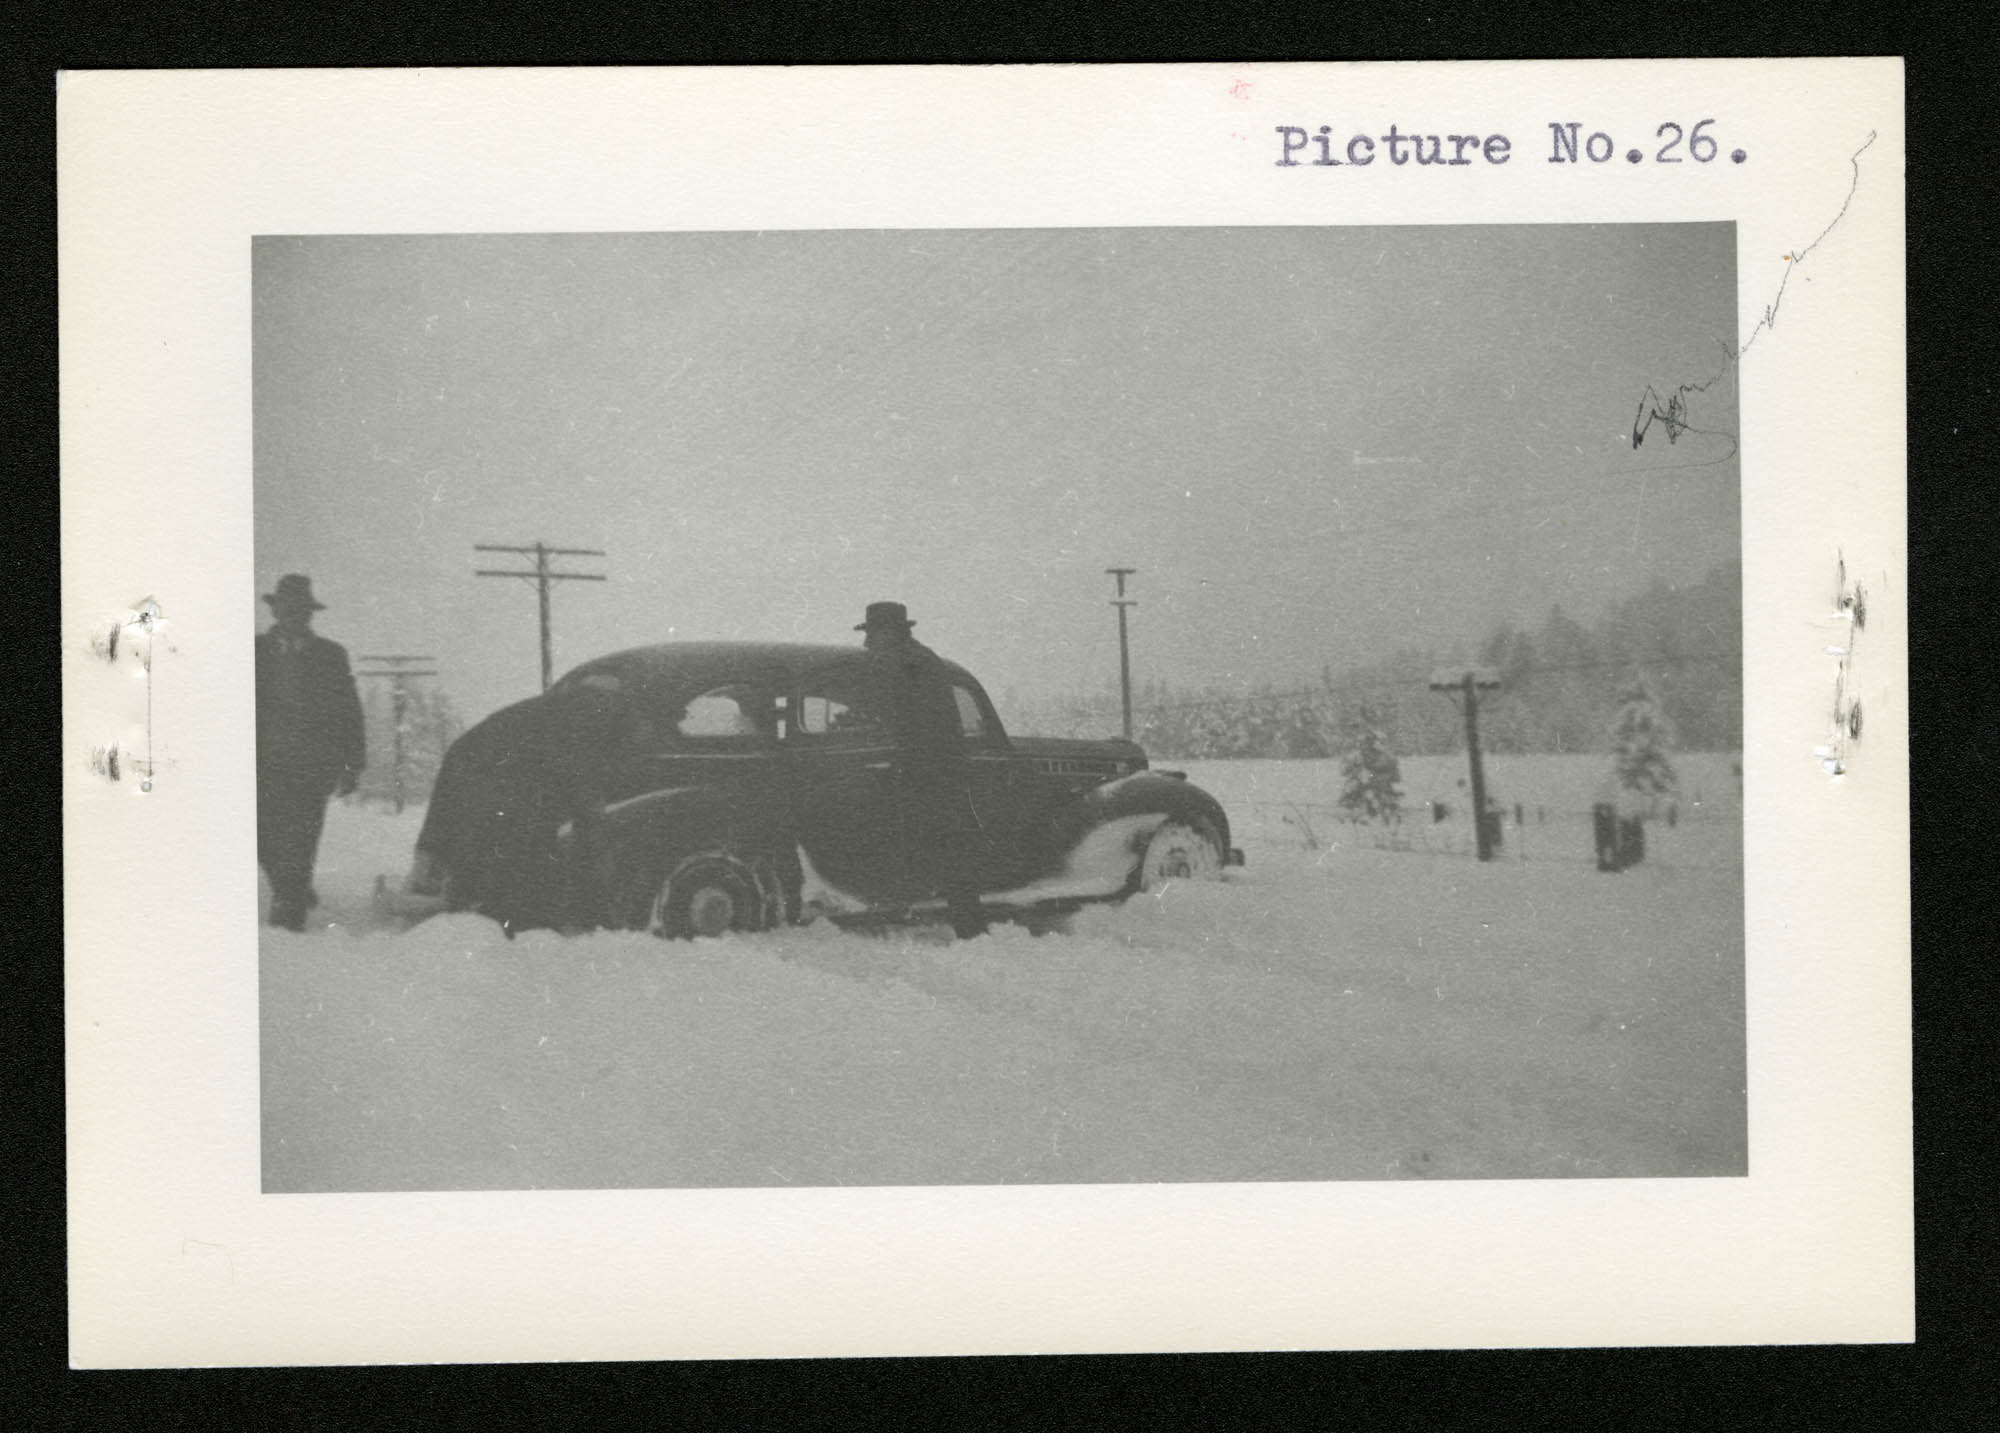 Three men and a car in a snowstorm: (from left to right) one man standing at the rear of the car, a second man bent over the back right tire, and a third man going towards the car to assist.